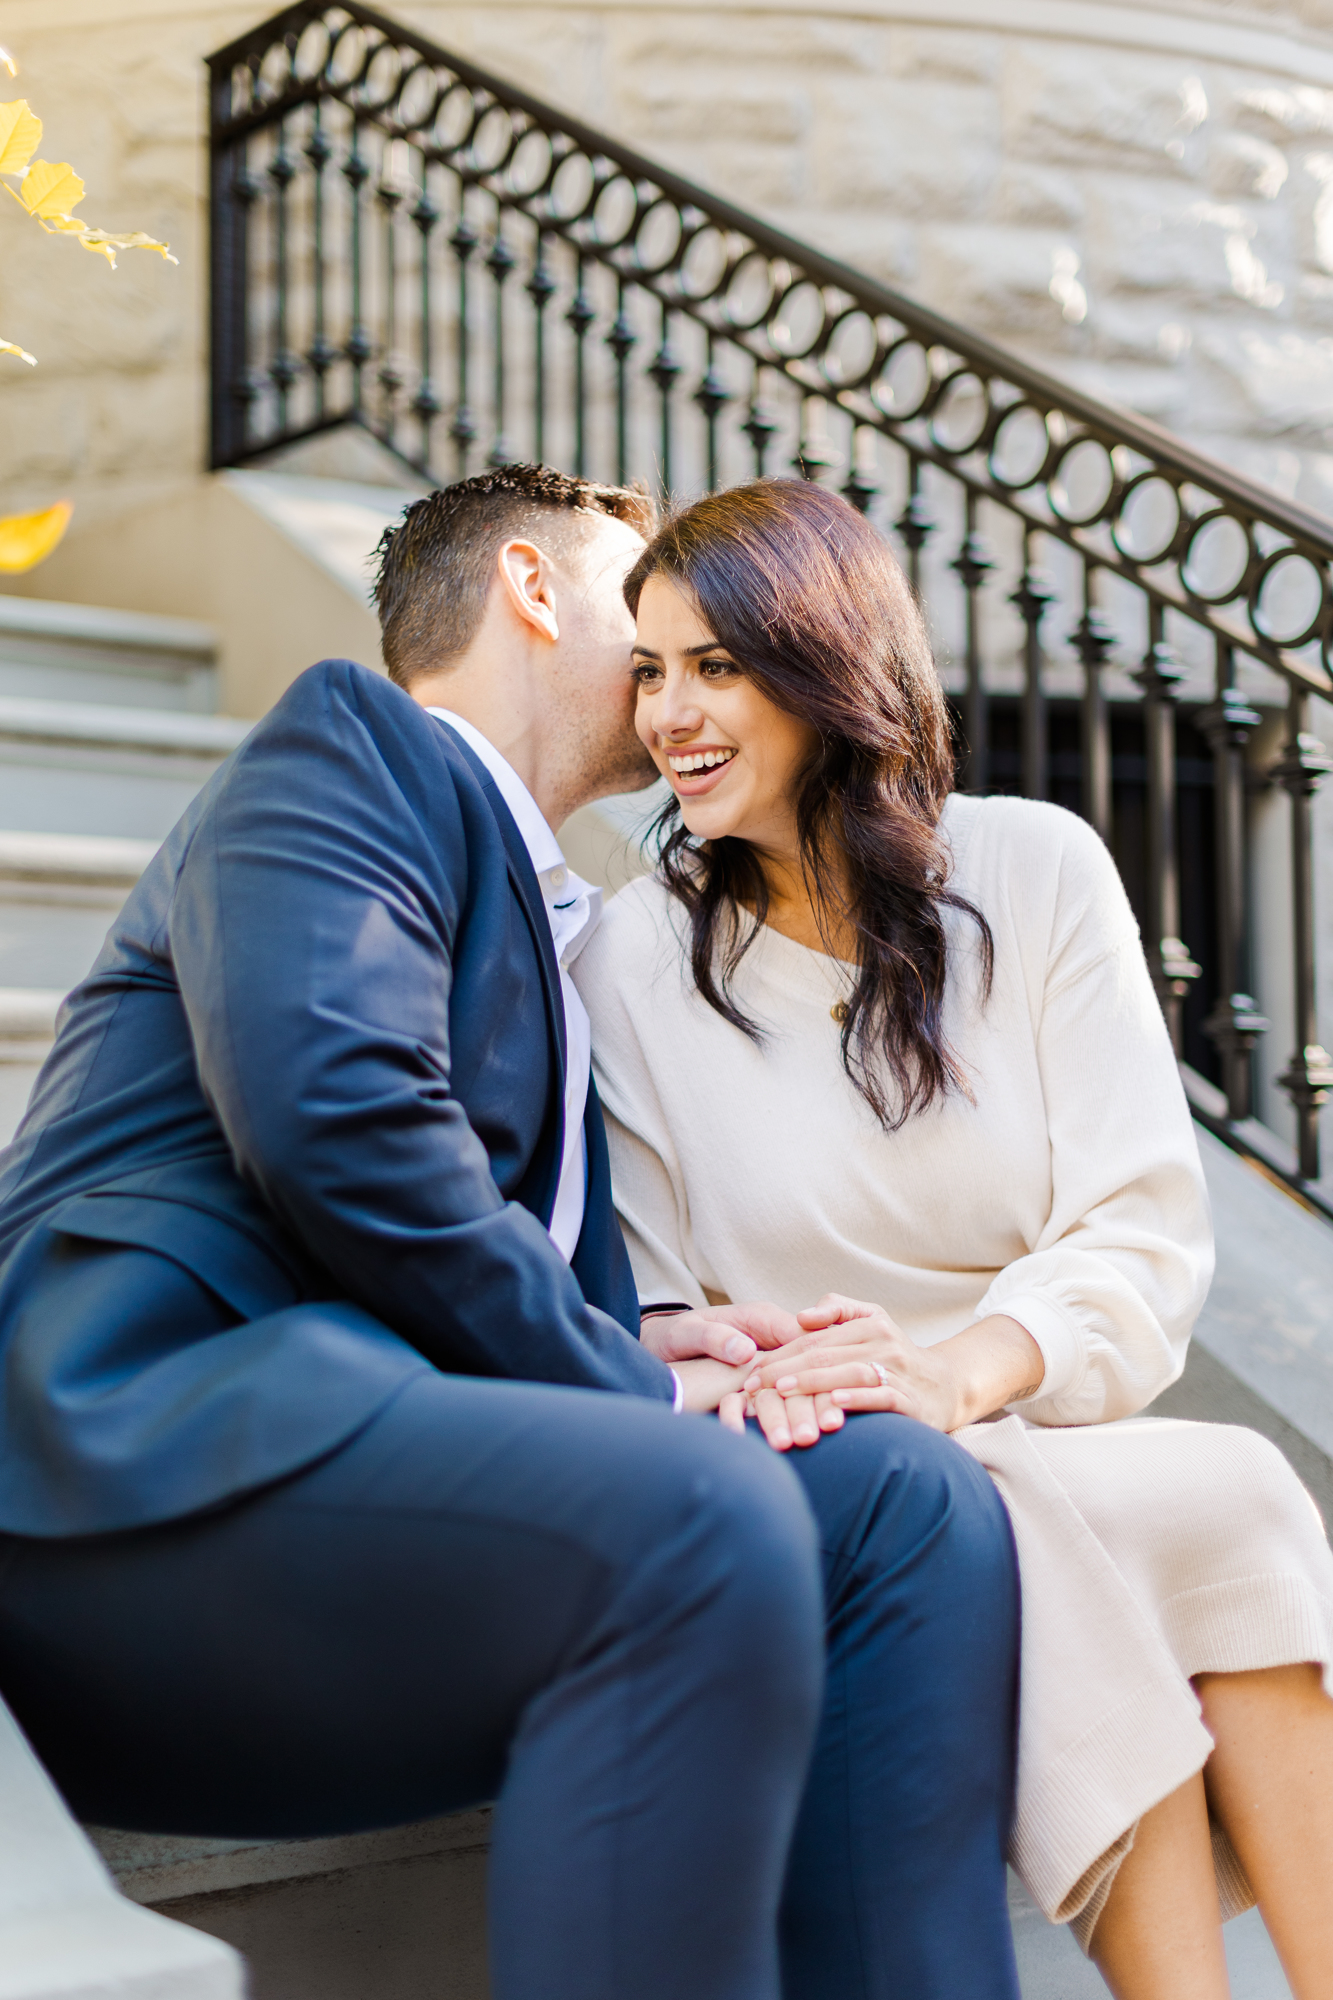 Sensational Upper West Side Engagement Photo Shoot in NYC